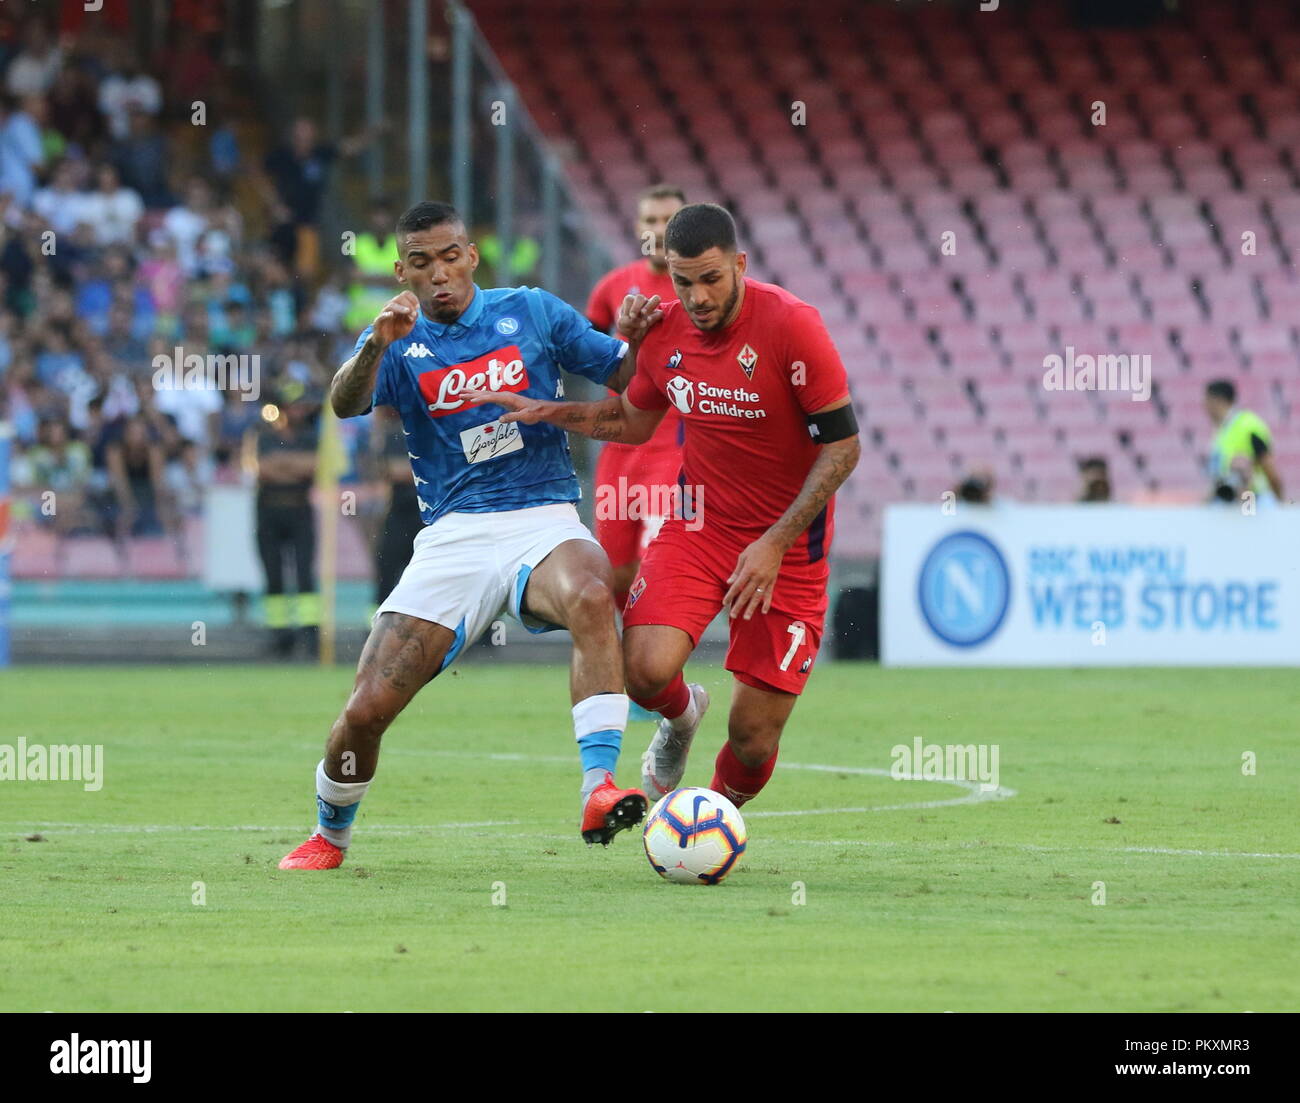 Naples, Italy. 15th September 2018. . In the picture: the Napoli Allan player fights for the ball with Fiorentina Eysseric.Stadium San Paolo Naples - 09/15/2018 - Italy.final result SSC Napoli 1 AC Fiorentina 0. Credit: Fabio Sasso/ZUMA Wire/Alamy Live News Stock Photo